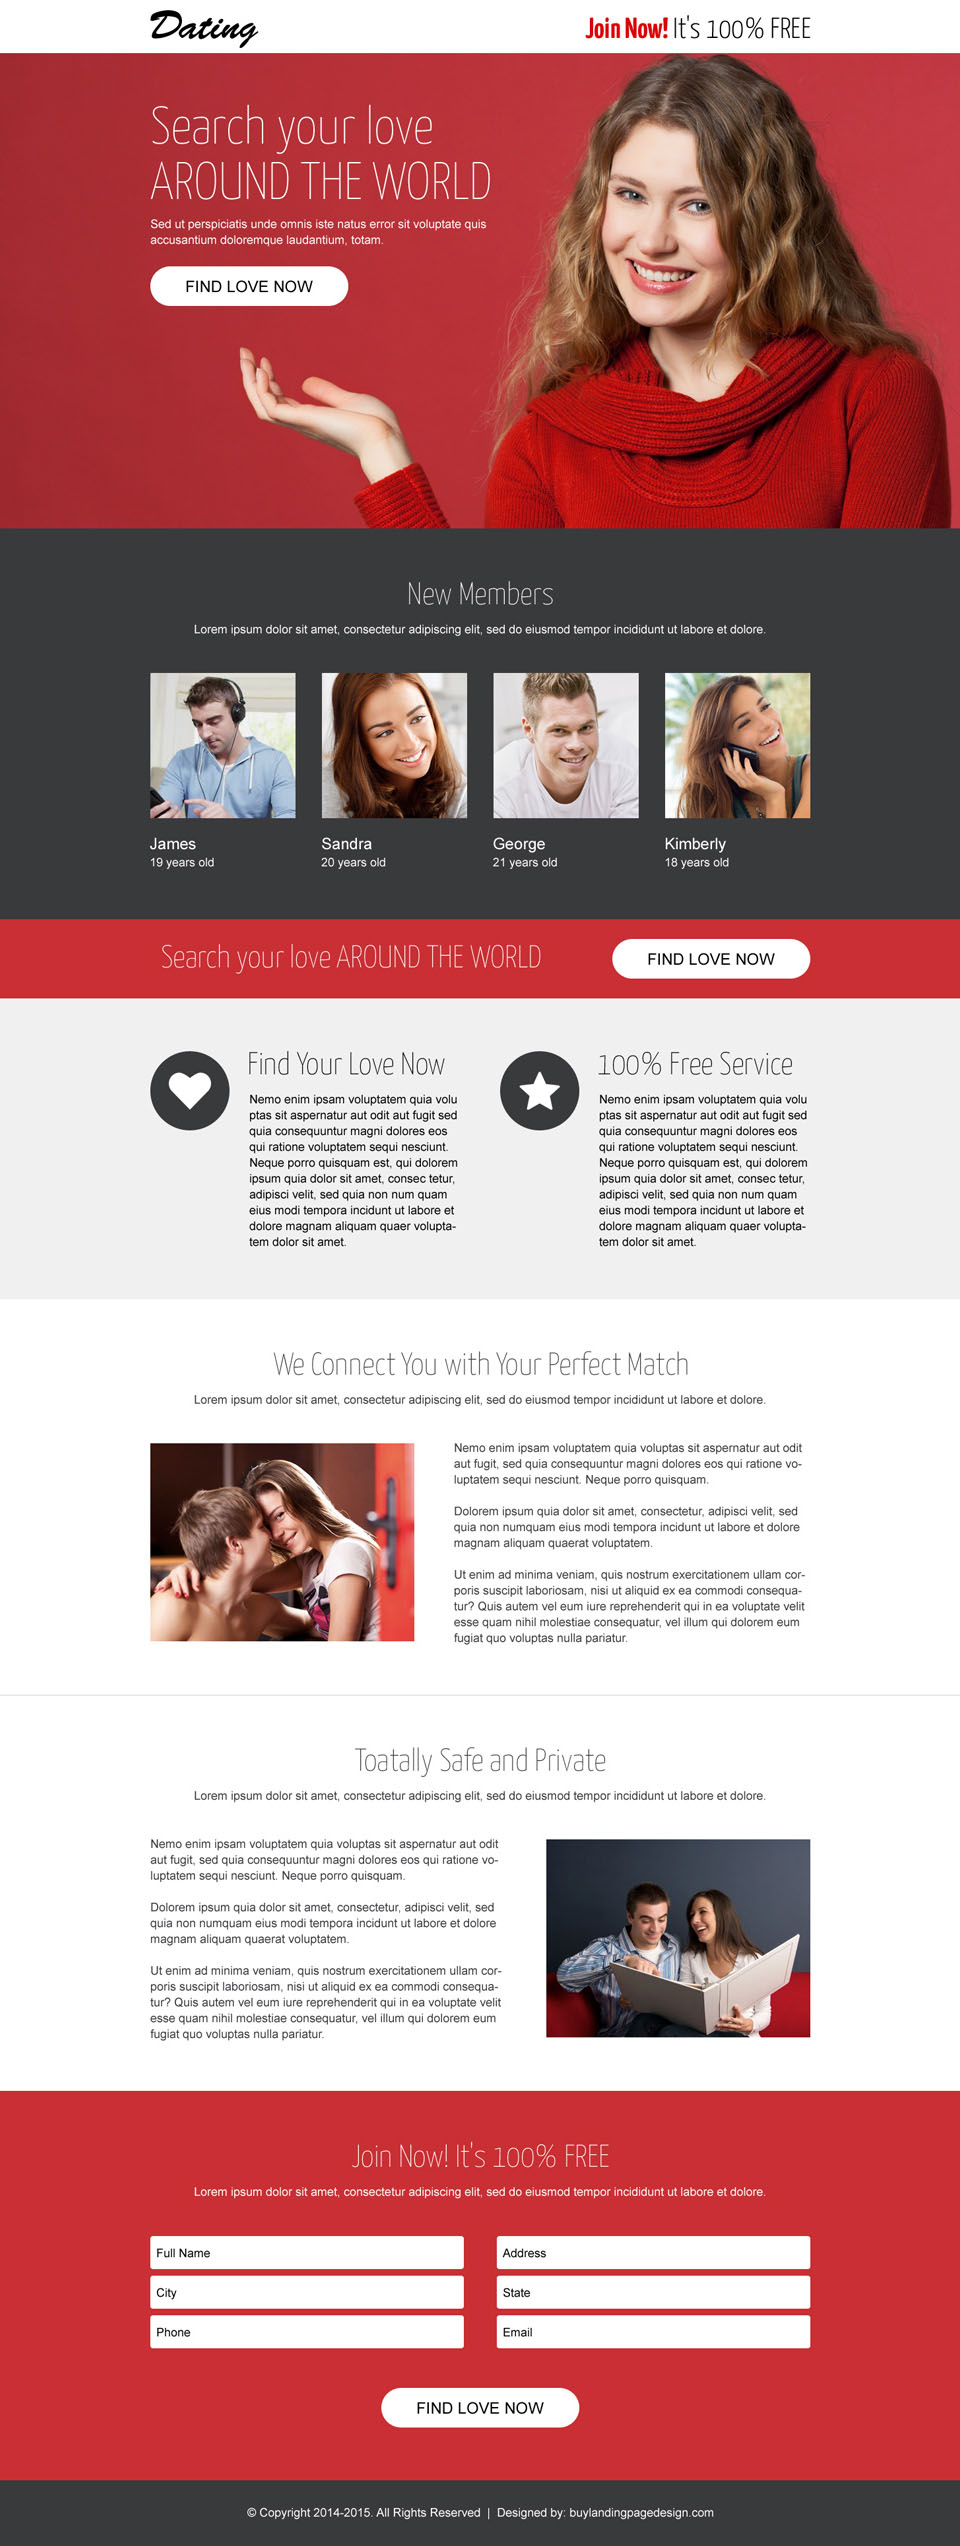 converting-dating-business-service-lead-generation-responsive-landing-page-design-004